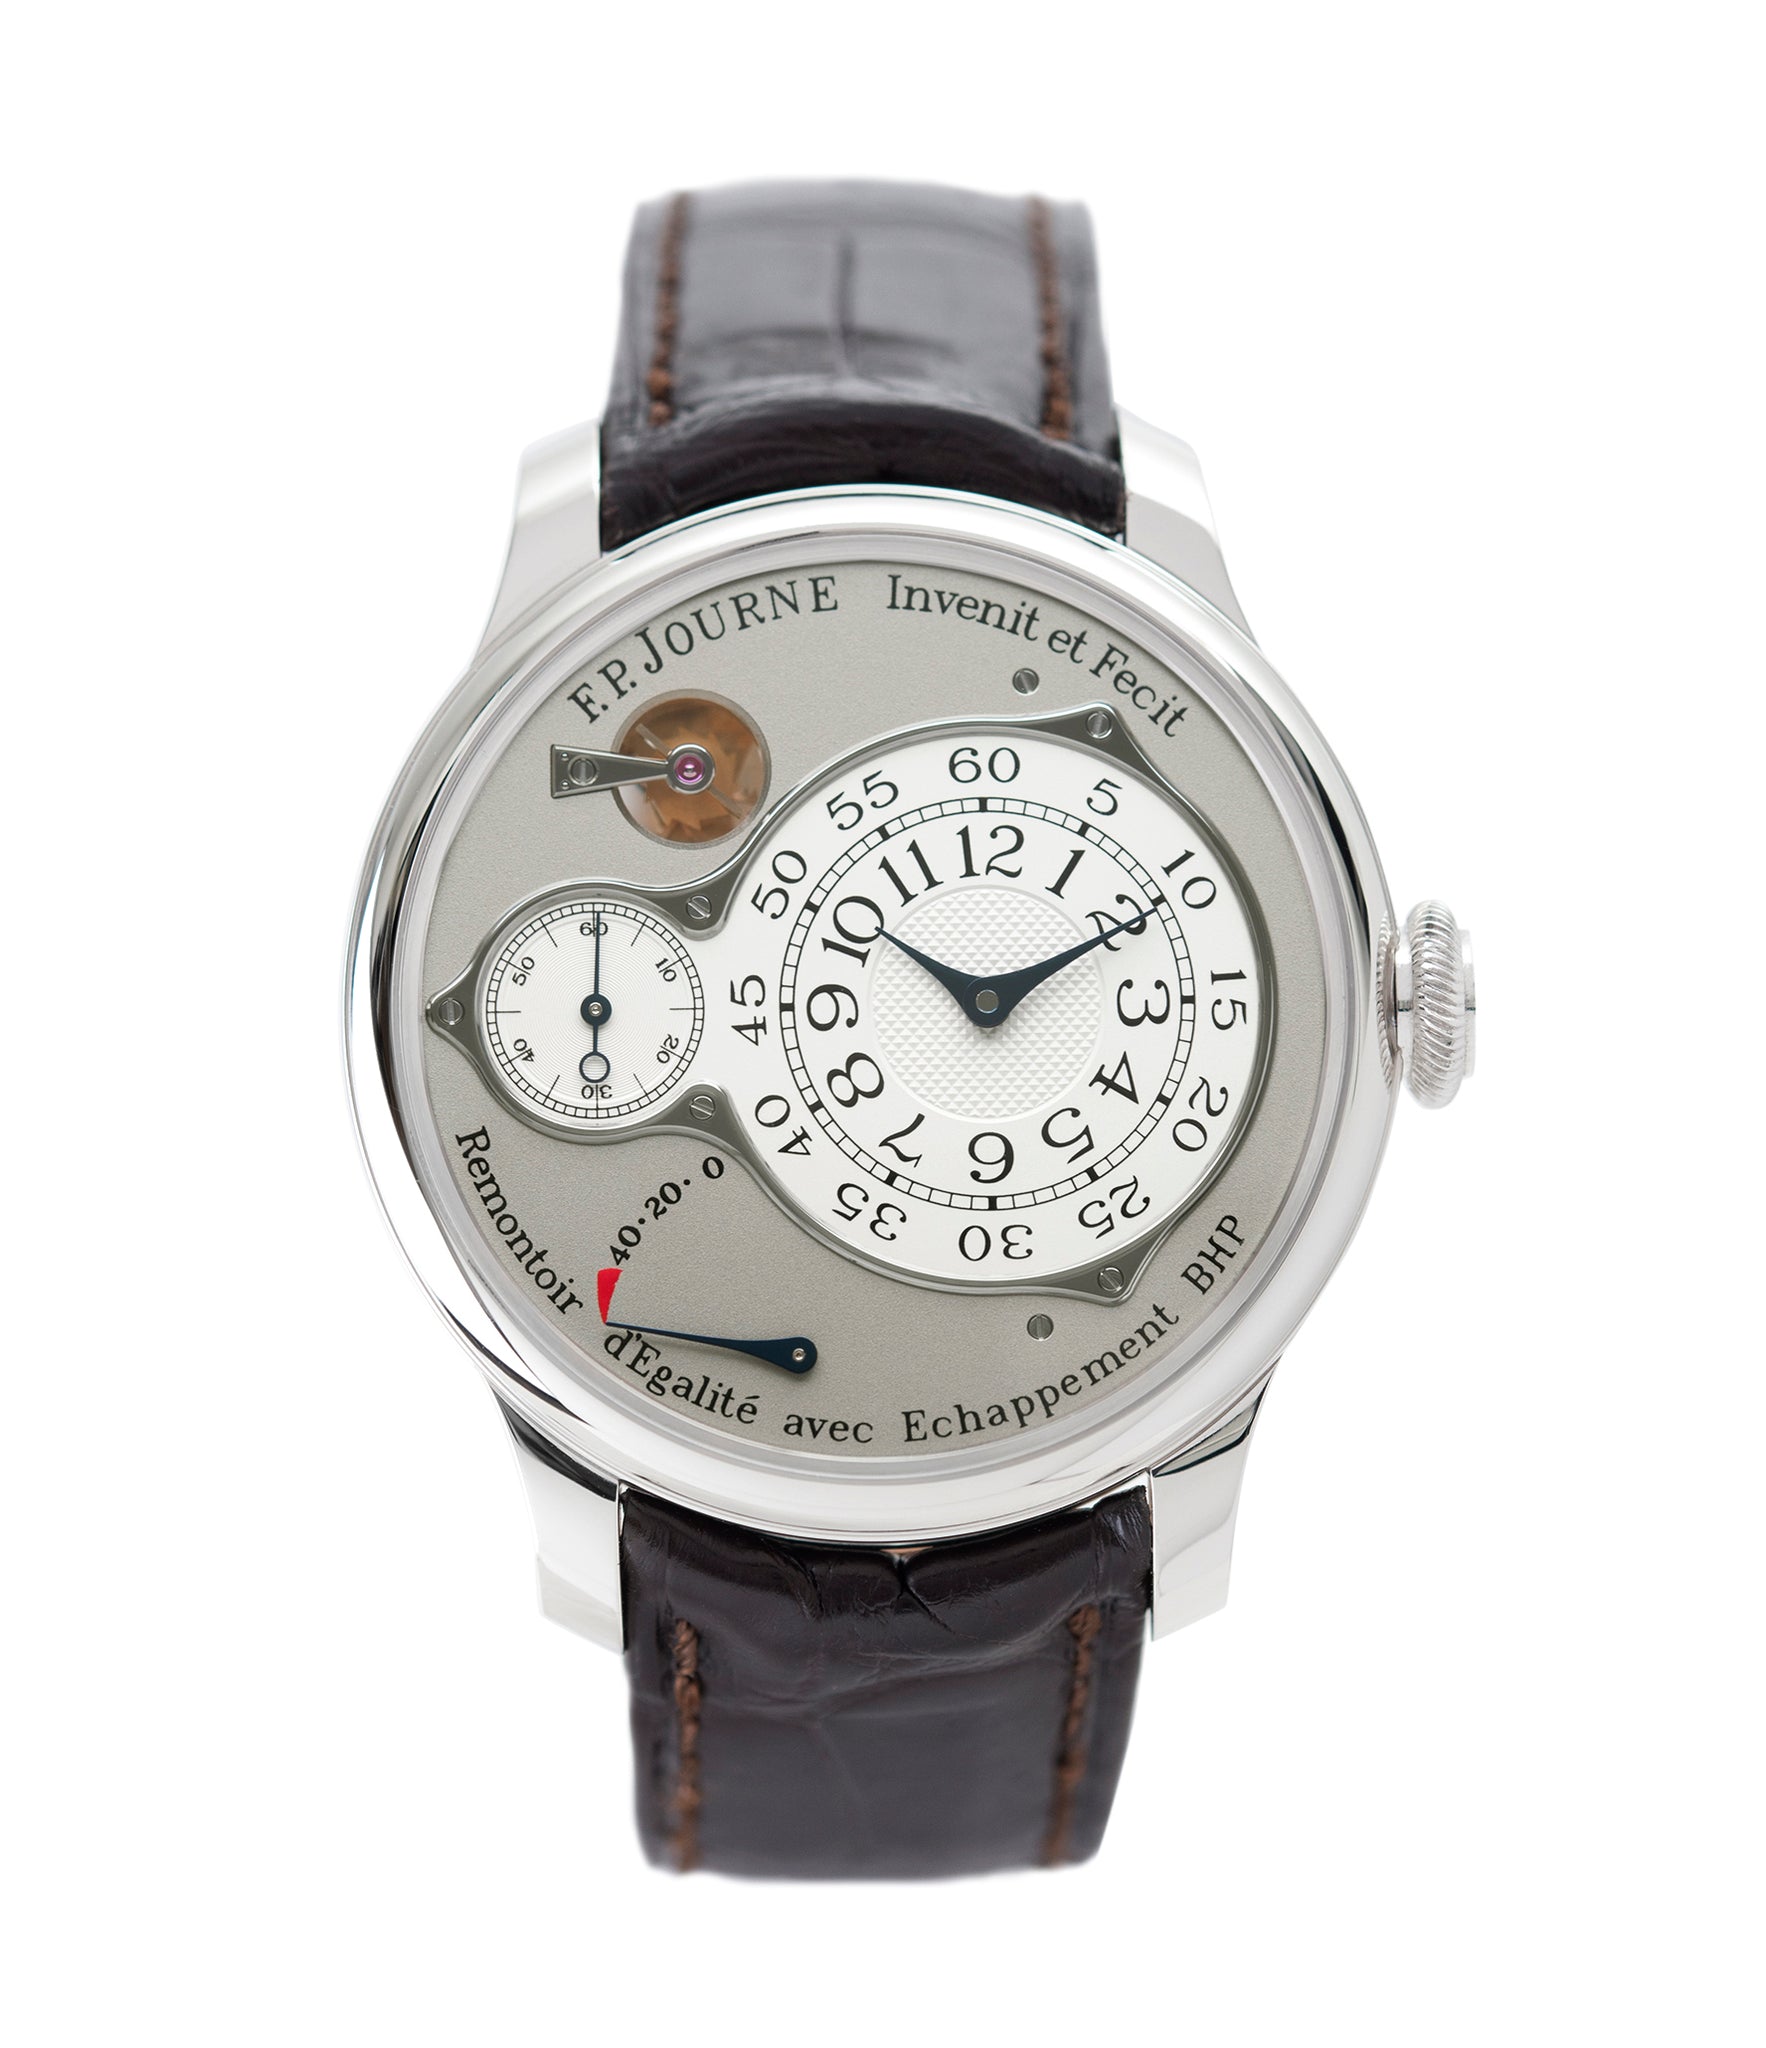 buy F. P. Journe Chronometre Optimum platinum rare watch for sale online at A Collected Man London approved retailer of independent watchmakers